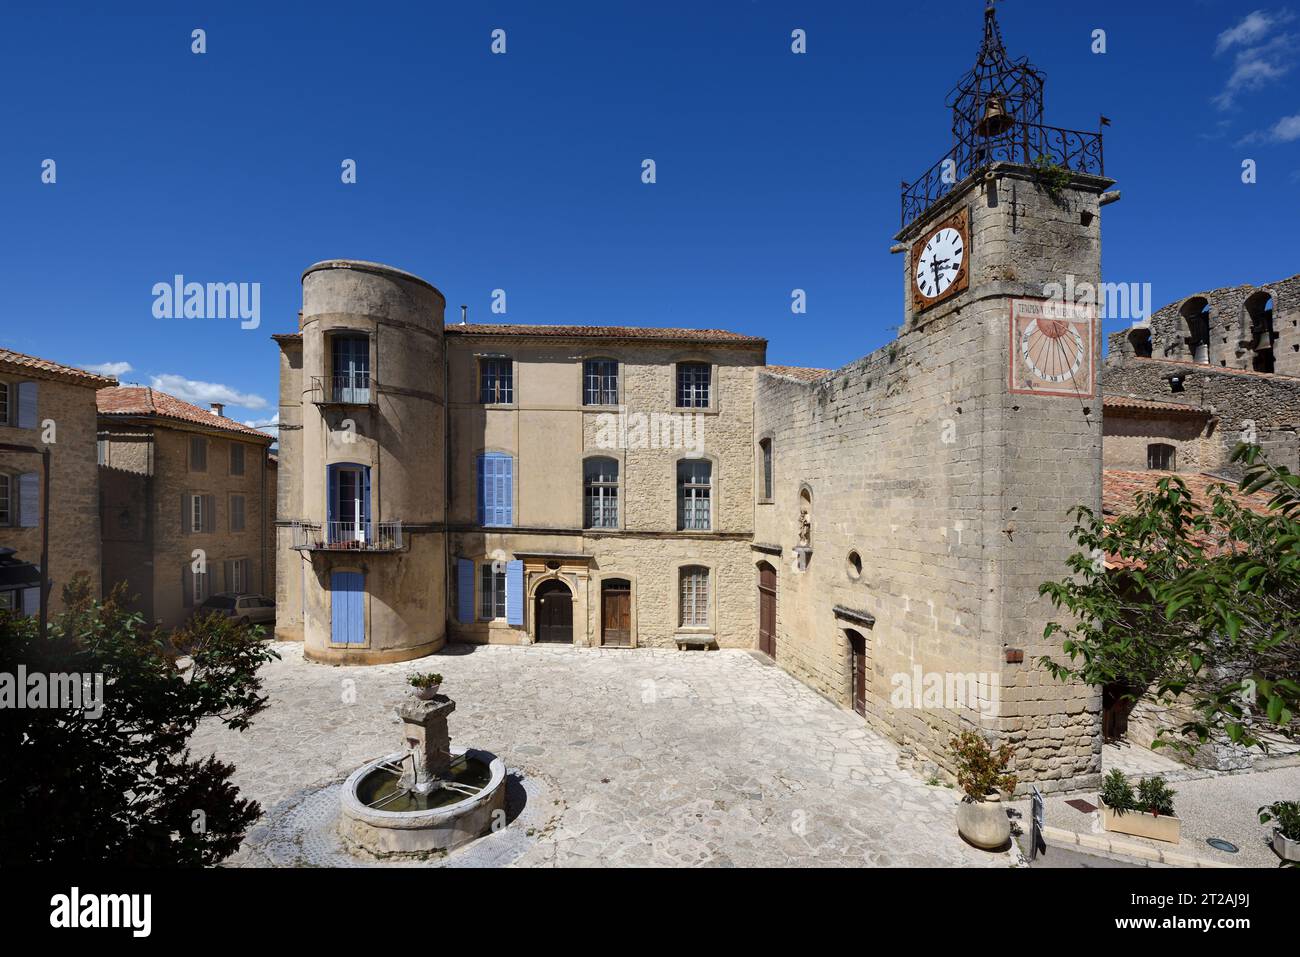 Château Grambois or Grambois Chateau, Courtyard, Belfry & Campanile of Church Grambois Luberon Provence France Stock Photo